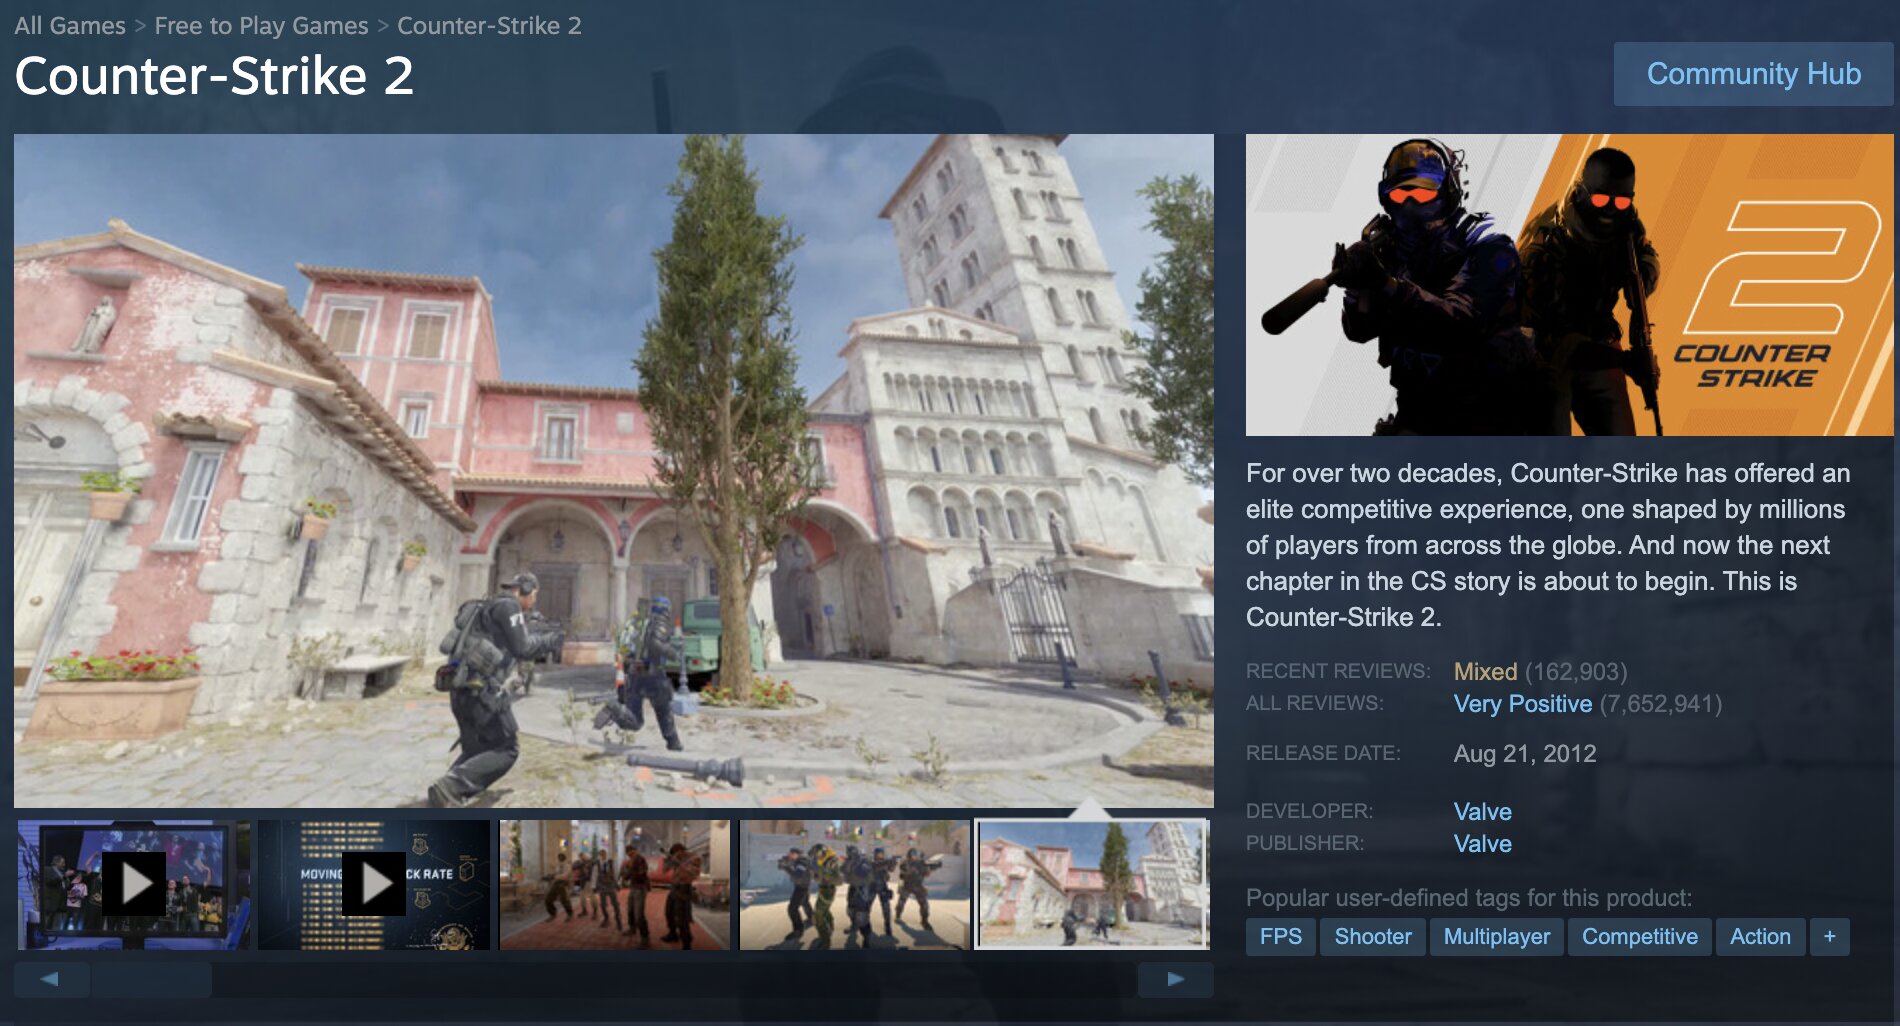 Counter-Strike 2 is out & available for free on Steam!